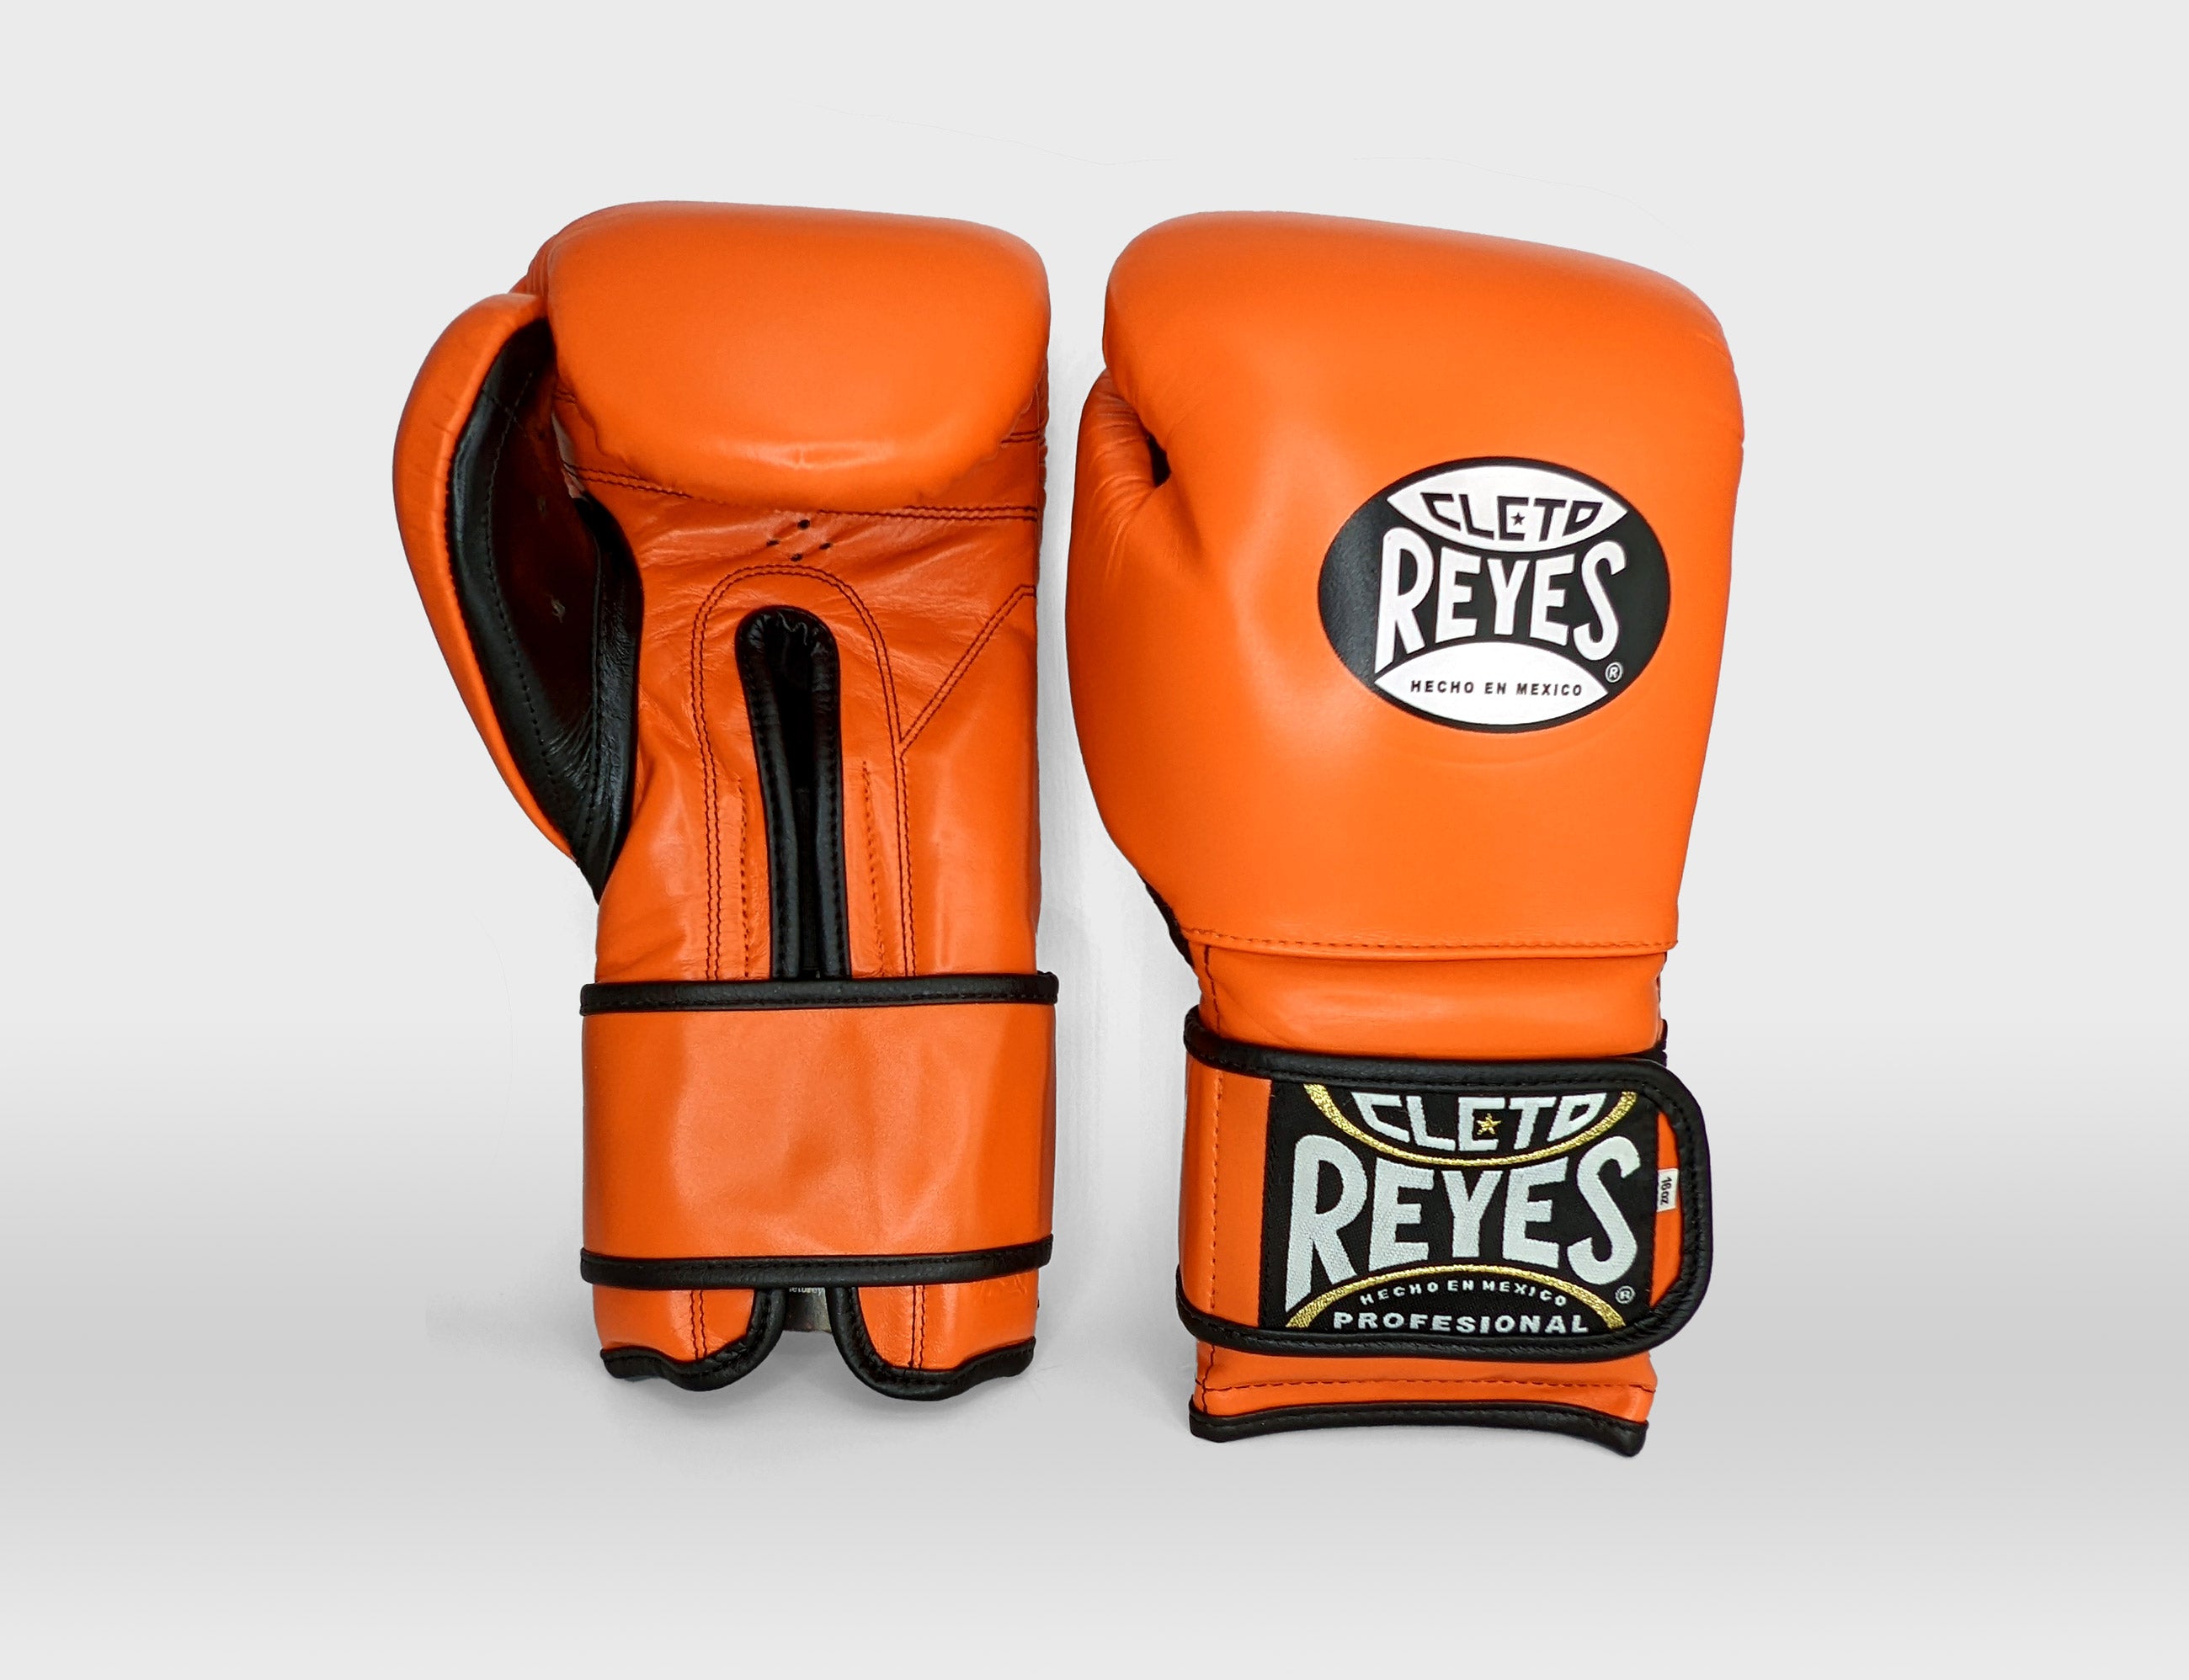 What makes Cleto Reyes's boxing gloves stand out?, by Gandrabaua